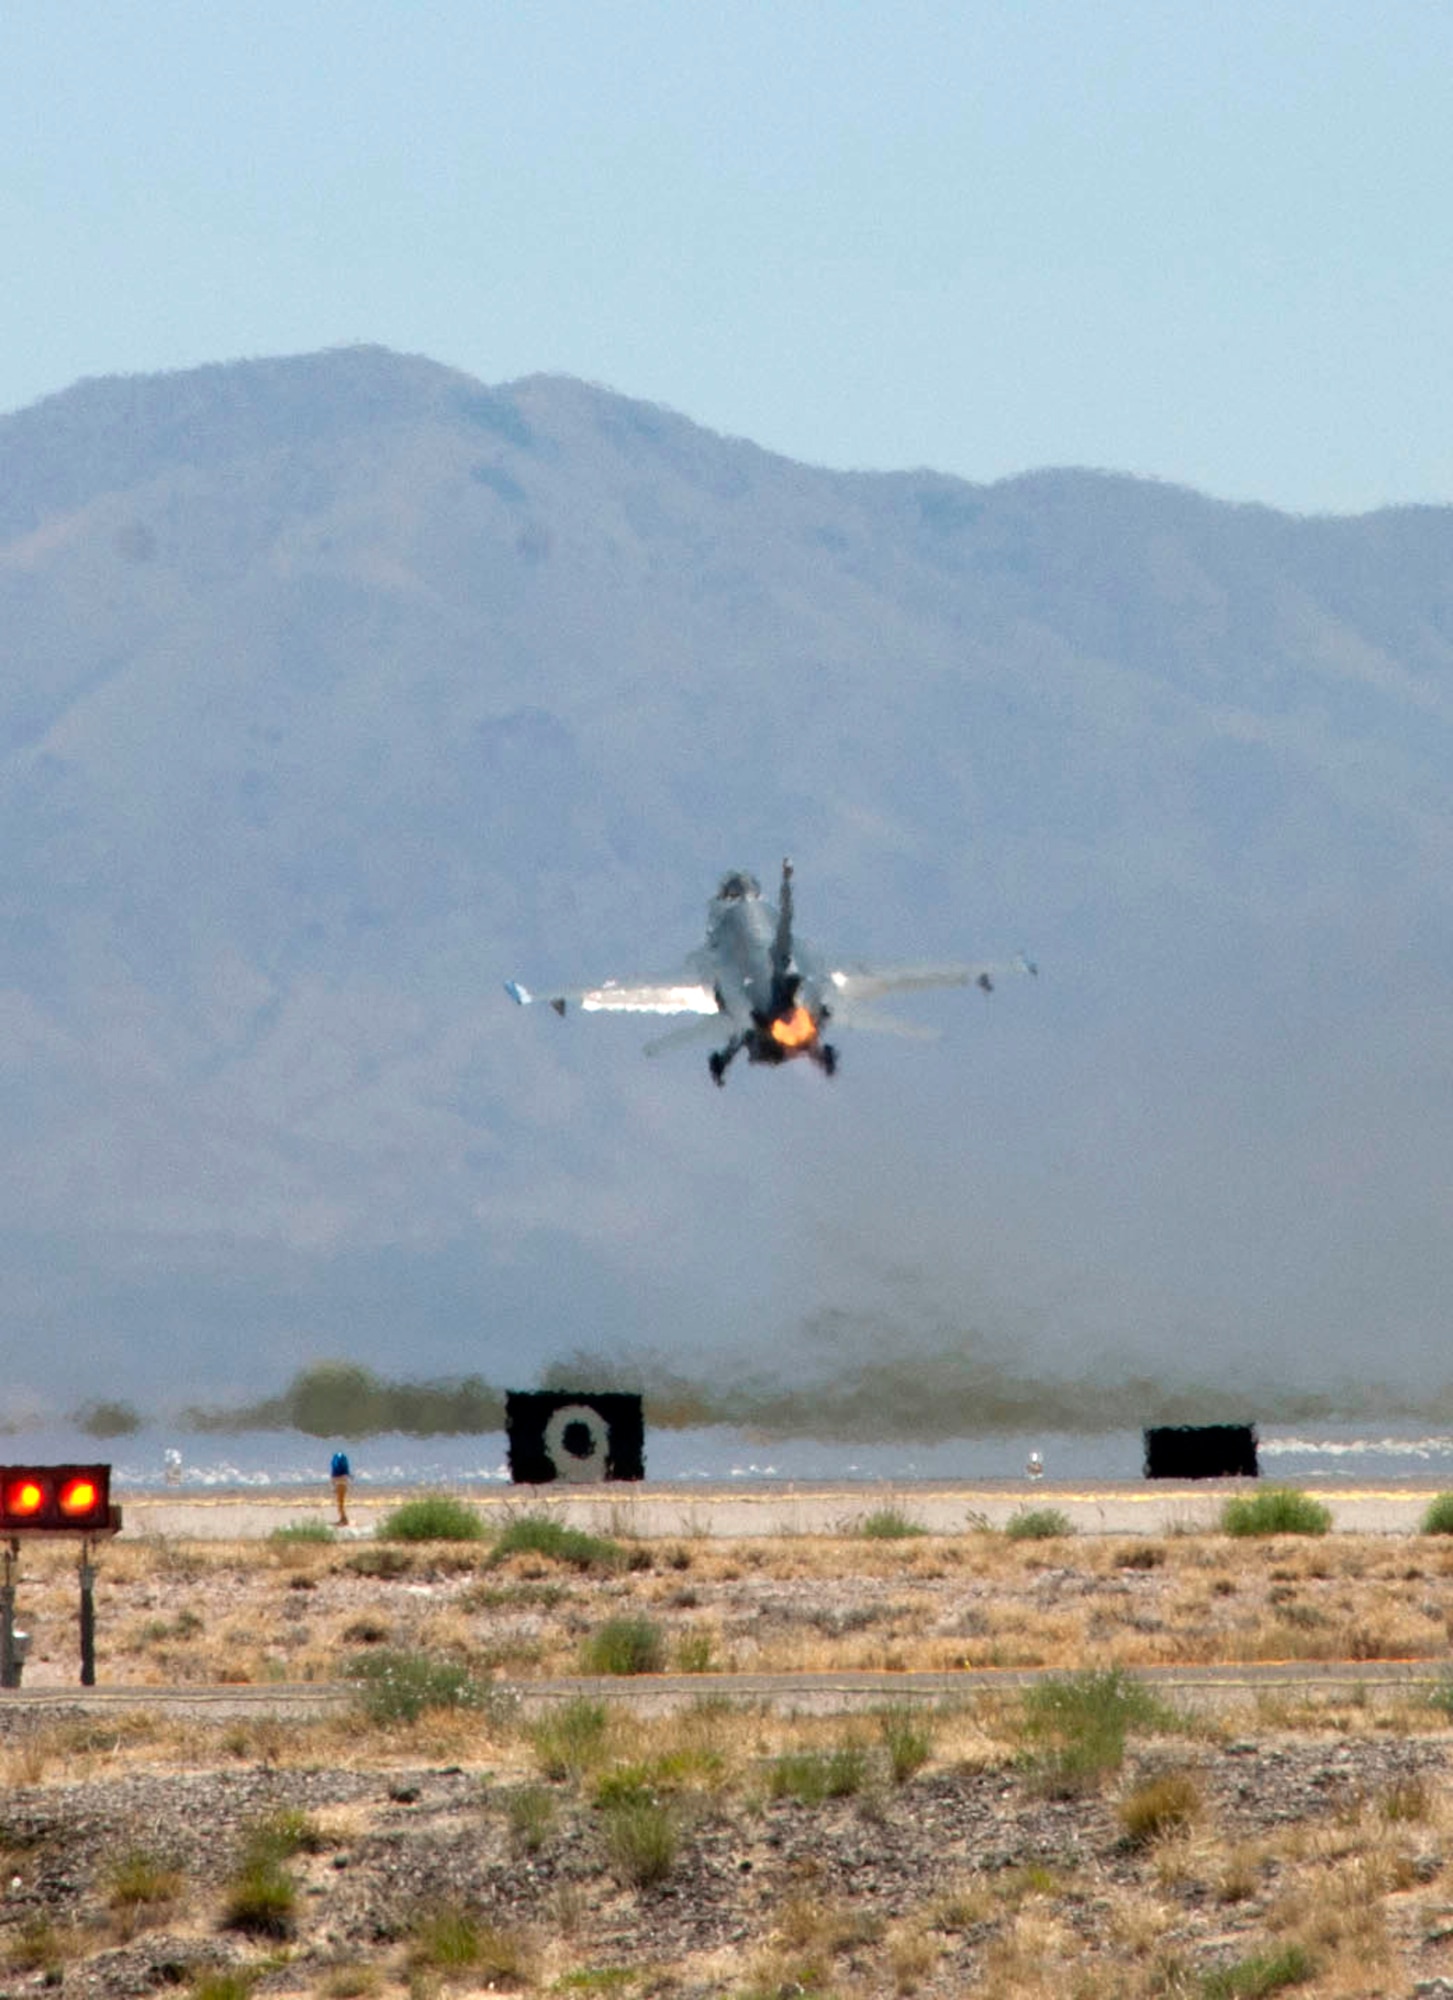 Lt. Daniel, a student pilot from the Royal Netherlands Air Force, takes off in an F-16 Fighting Falcon at Tucson International Airport, April 28. The 162nd Fighter Wing here trains Dutch fighter pilots in Dutch-owned F-16 Mid-Life Update aircraft - essentially early-model F-16A/B's that have undergone cockpit and avionics upgrades that make them as capable as the newer C/D-models. Lt. Daniel’s last name is omitted for security purposes. (U.S. Air Force photo/Master Sgt. Dave Neve)